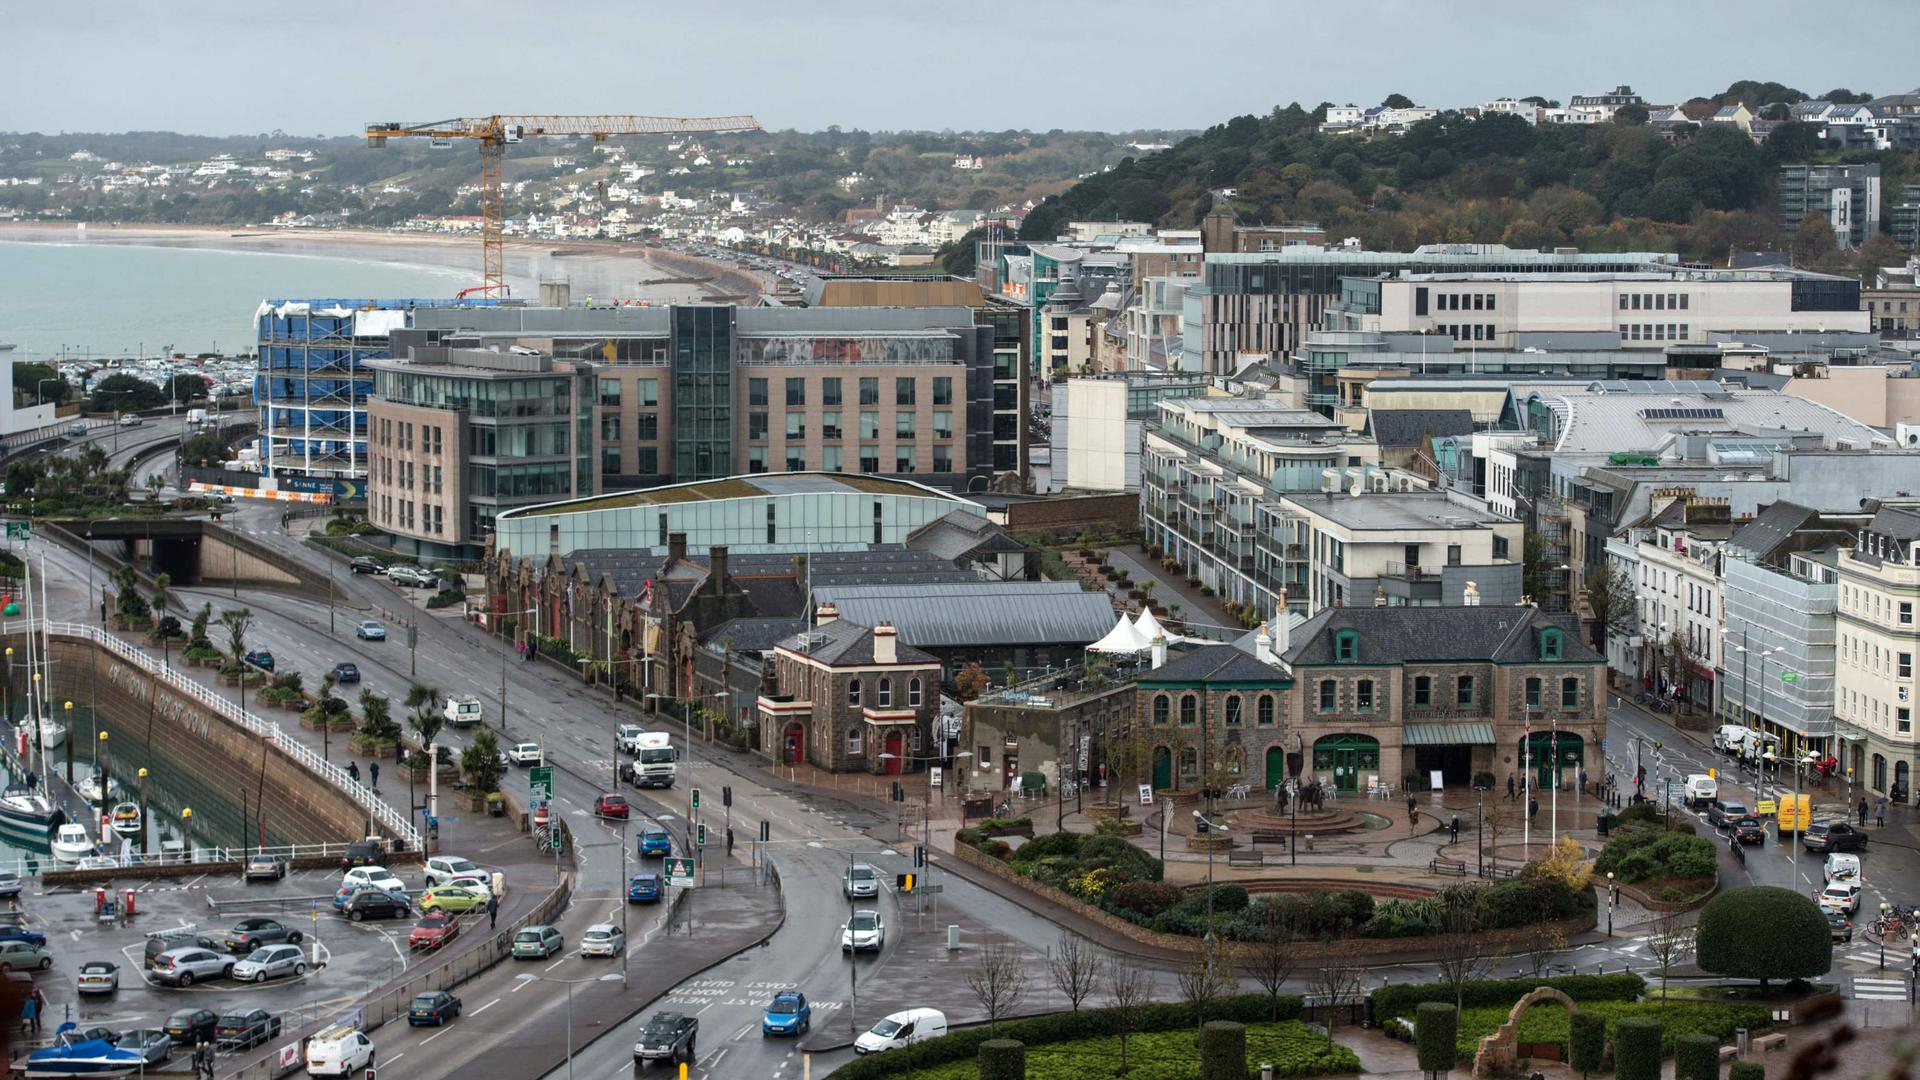 Office and residential buildings are pictured in front of the beach and seafront in St Helier, on the British island of Jersey